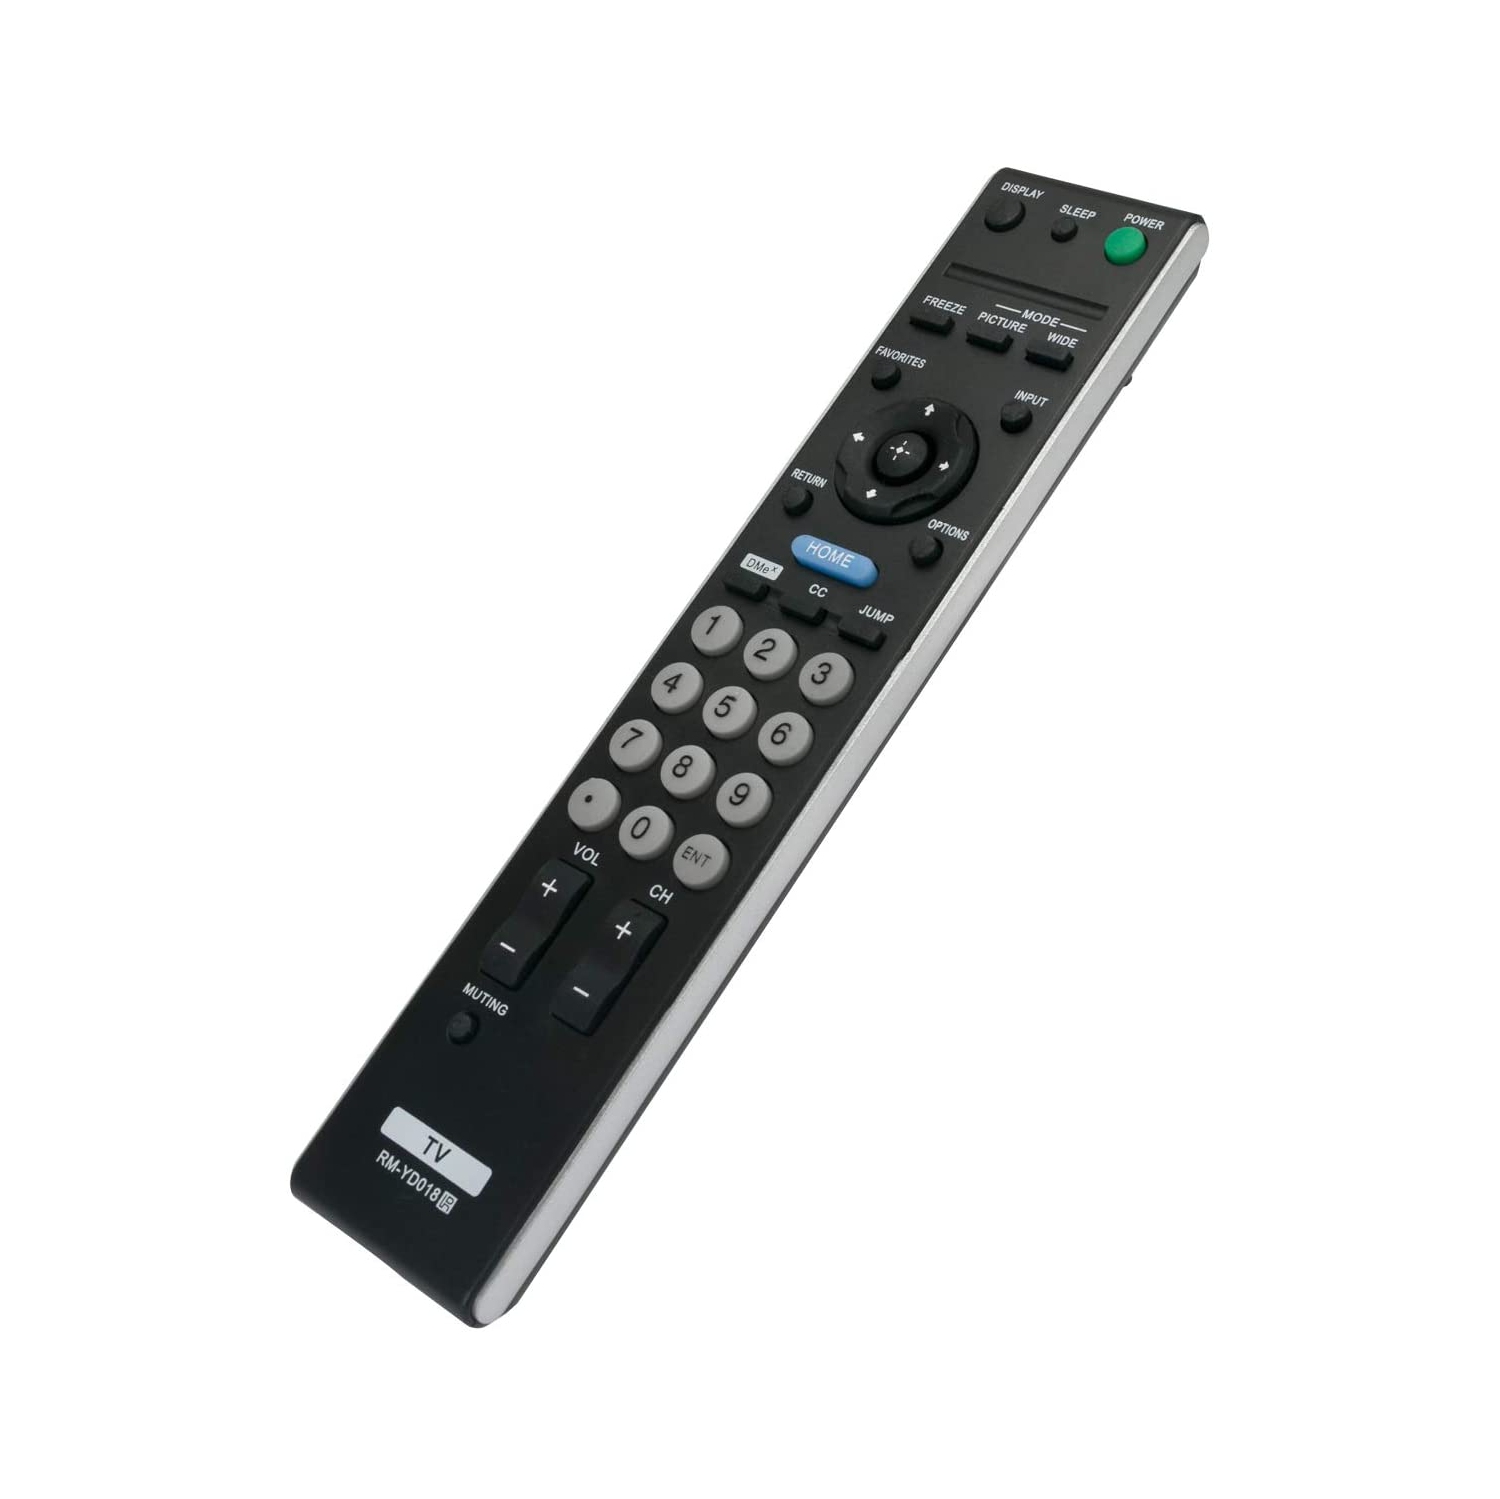 RM-YD018 Replacement Remote Control Applicable for Sony Bravia TV KDL-32SL130 KDL-40SL130 KDL-26S3000 KDL-46S3000